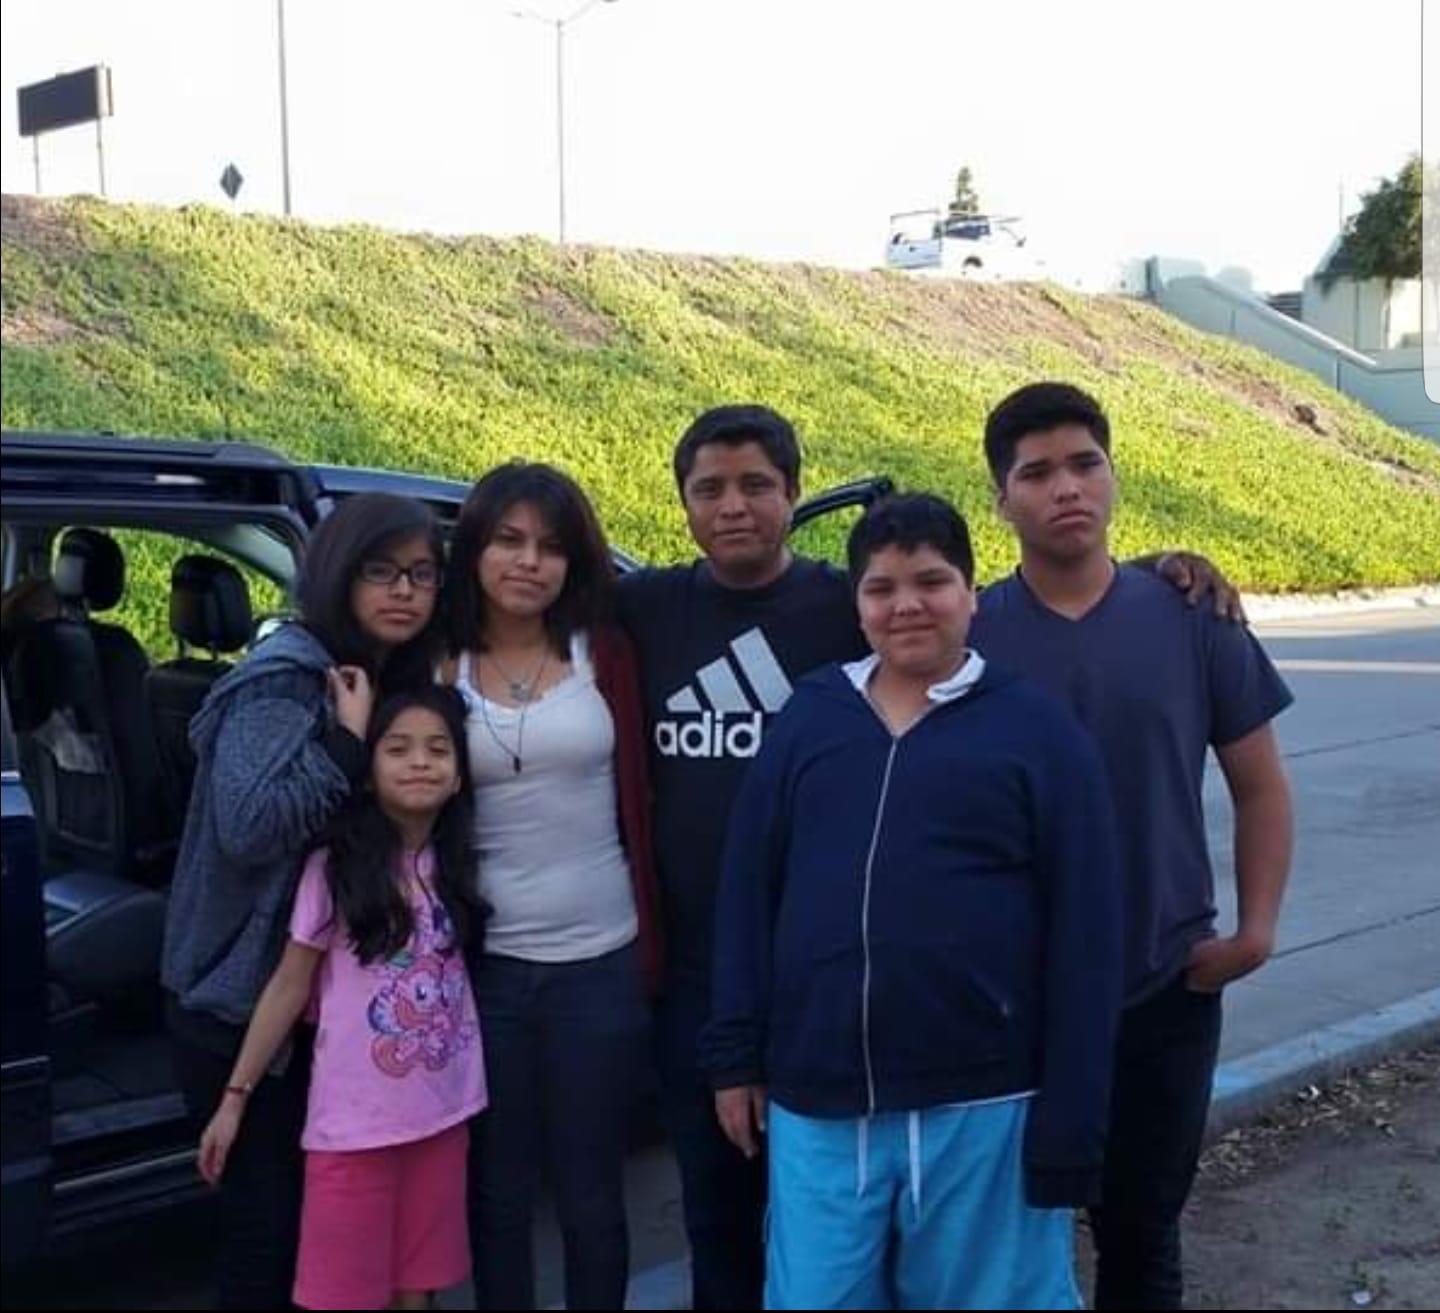 A family stands in front of car near a green hill